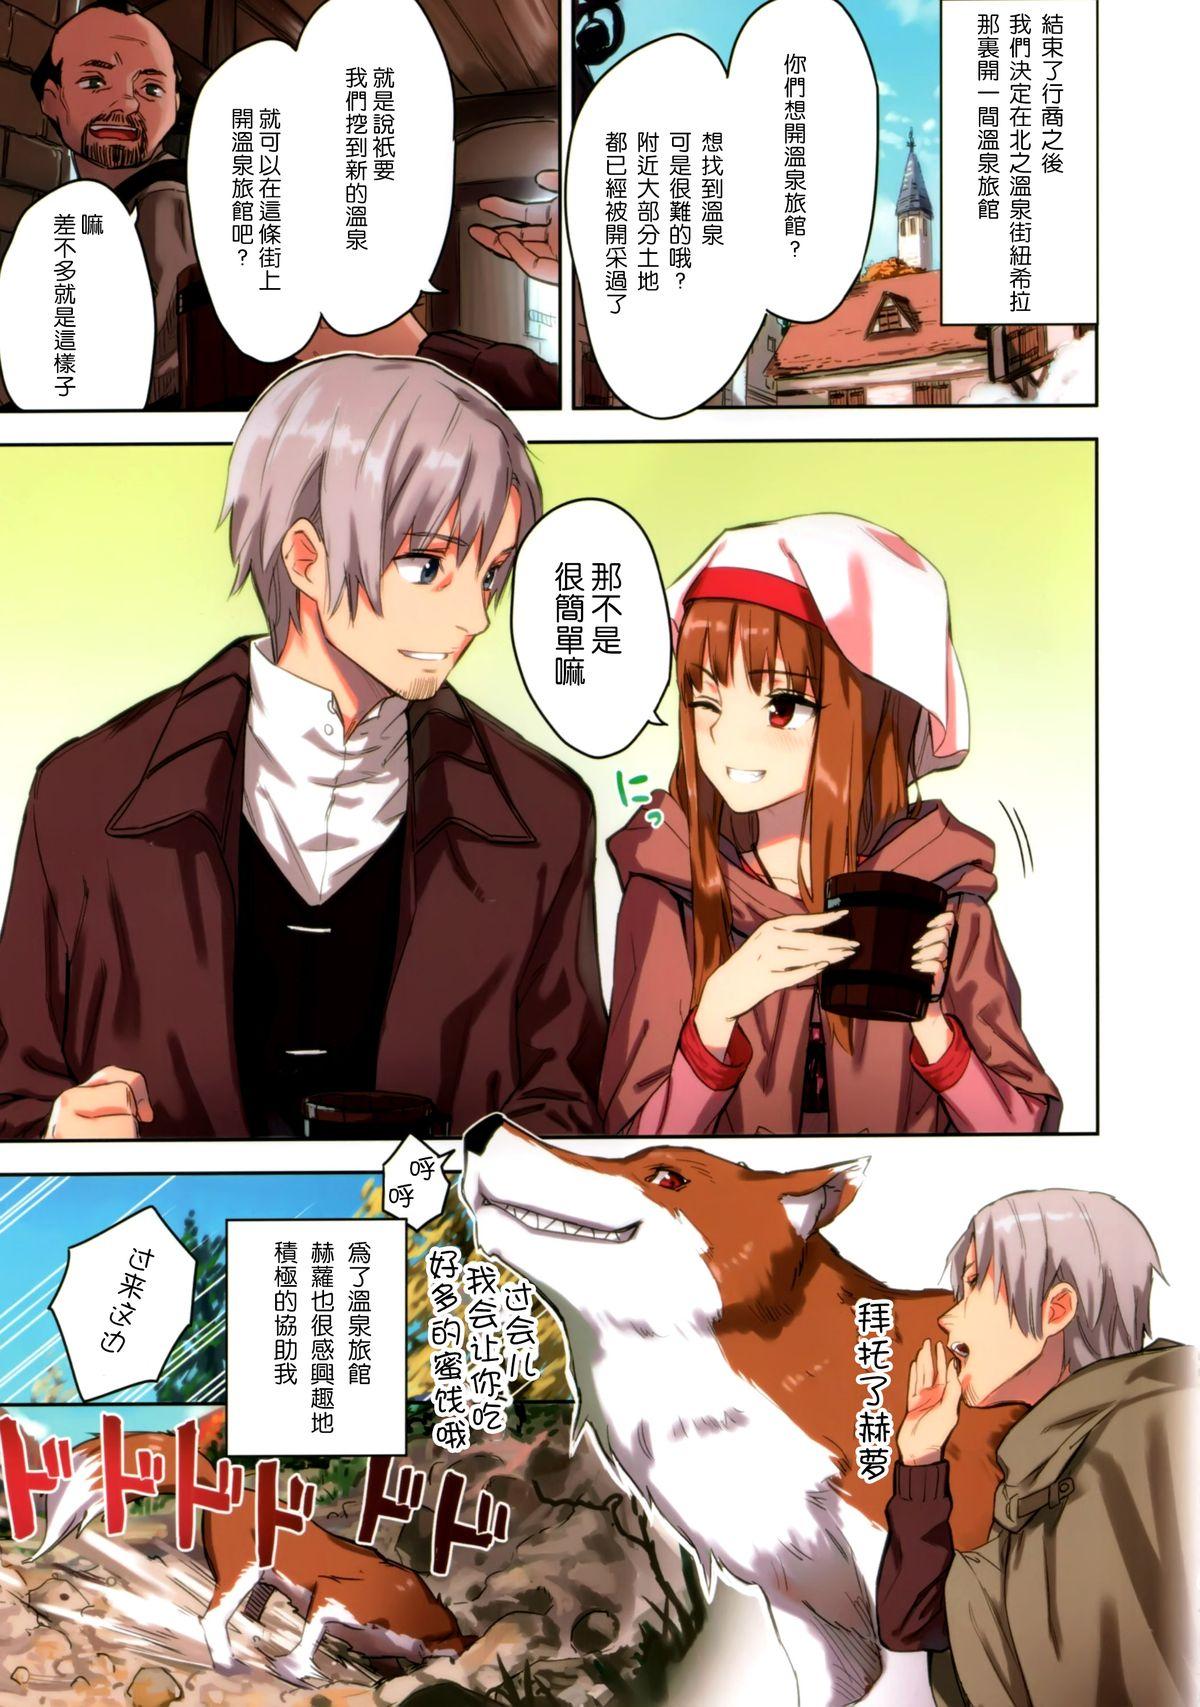 Missionary Position Porn Wacchi to Nyohhira Bon FULL COLOR - Spice and wolf Foot Fetish - Page 6